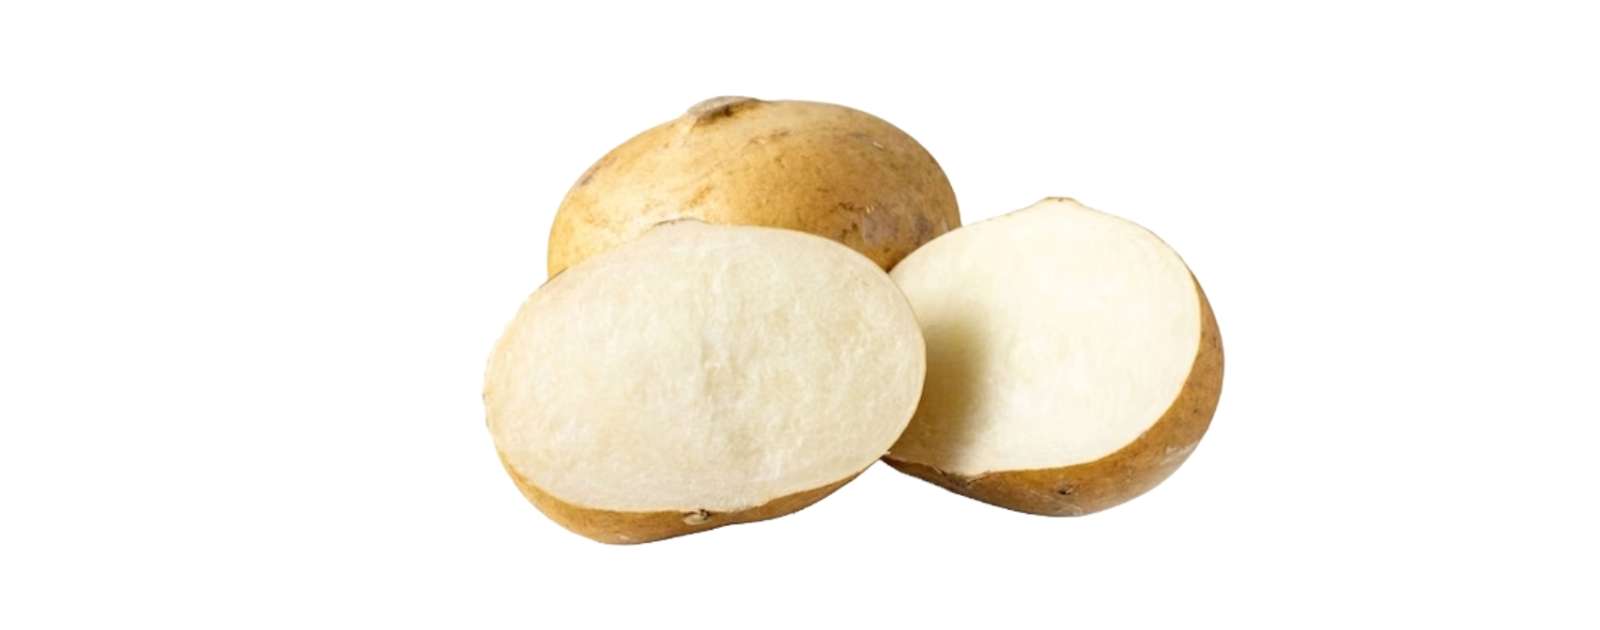 Your Jicama Brown Inside: Is It Bad? How to Recognize Mold and Unusual Smells